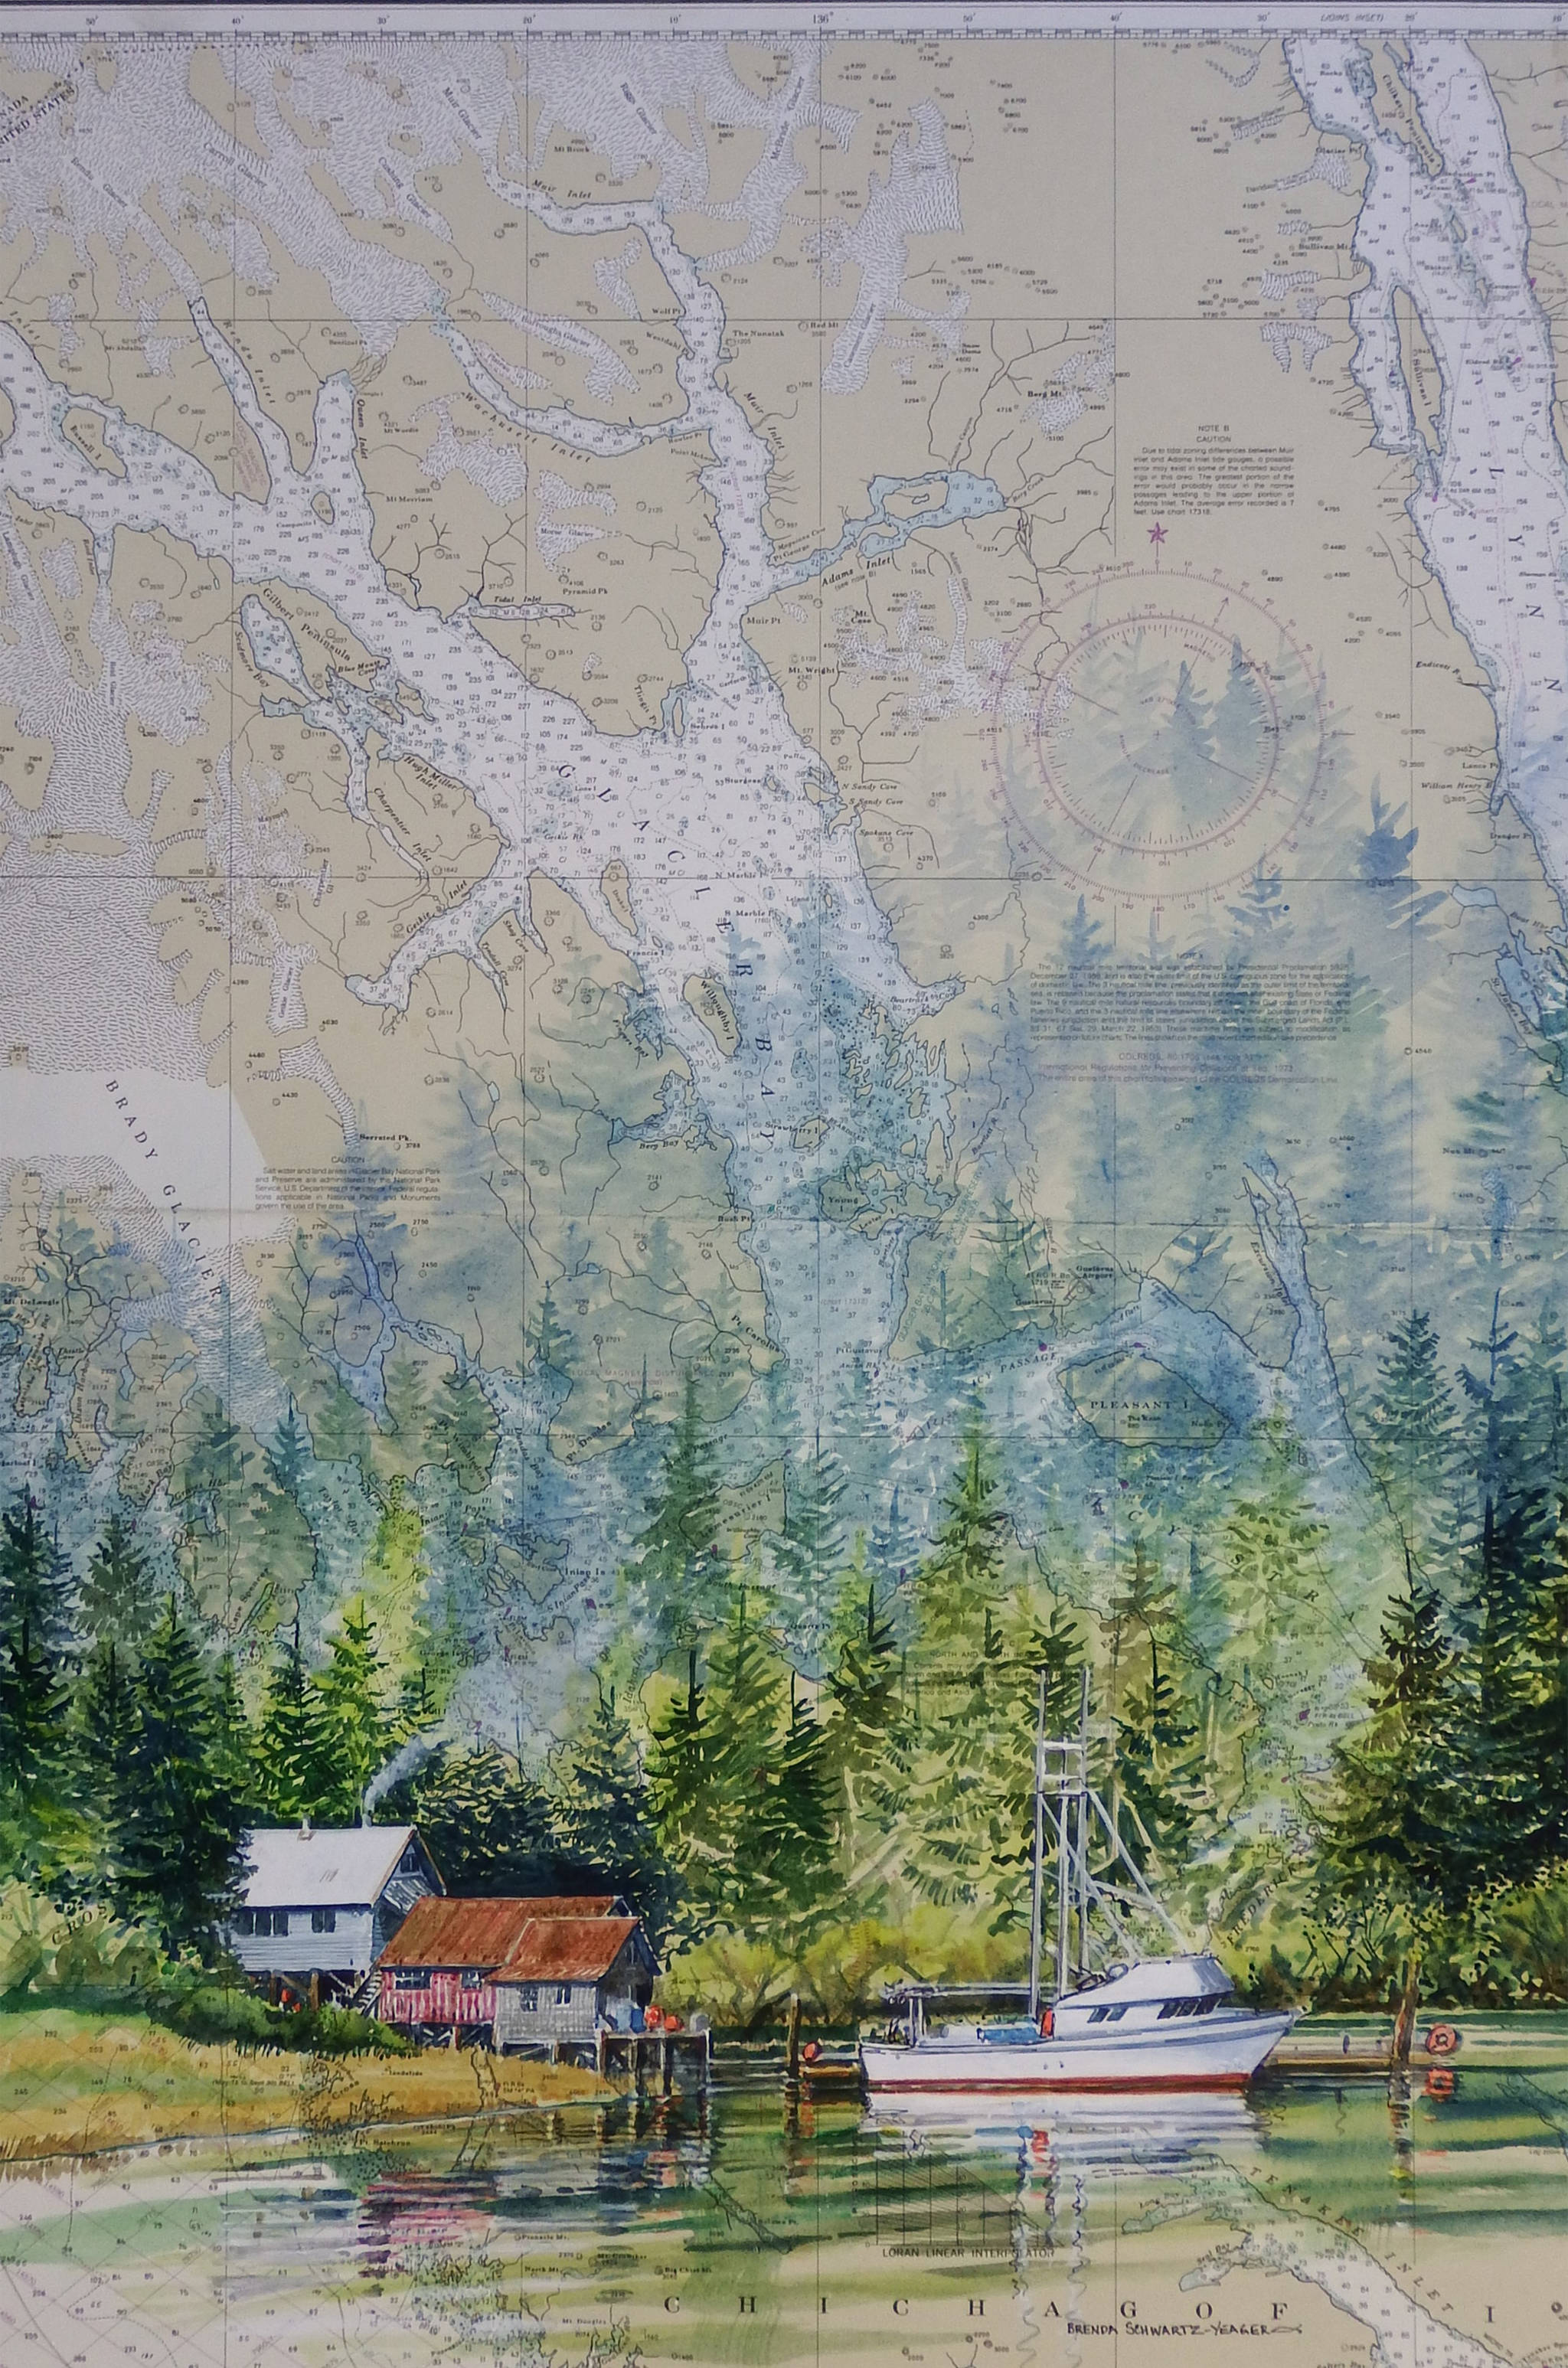 Original “Back Bay” ” by Brenda Schwartz-Yeager will be on sale at the Juneau Public Market. Courtesy image.